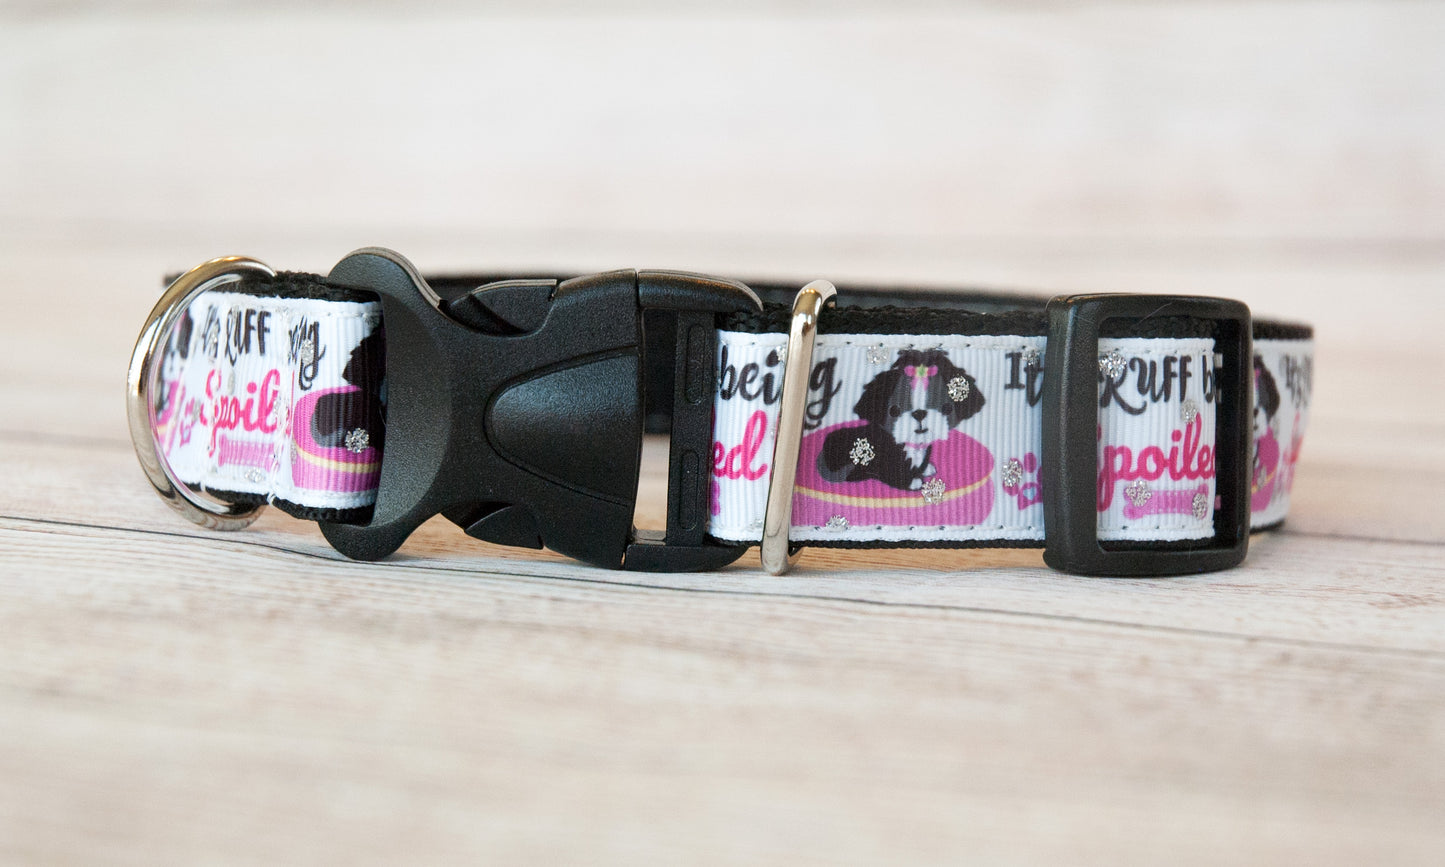 It's Ruff being spoiled dog collar and/or leash. 1 inch wide.